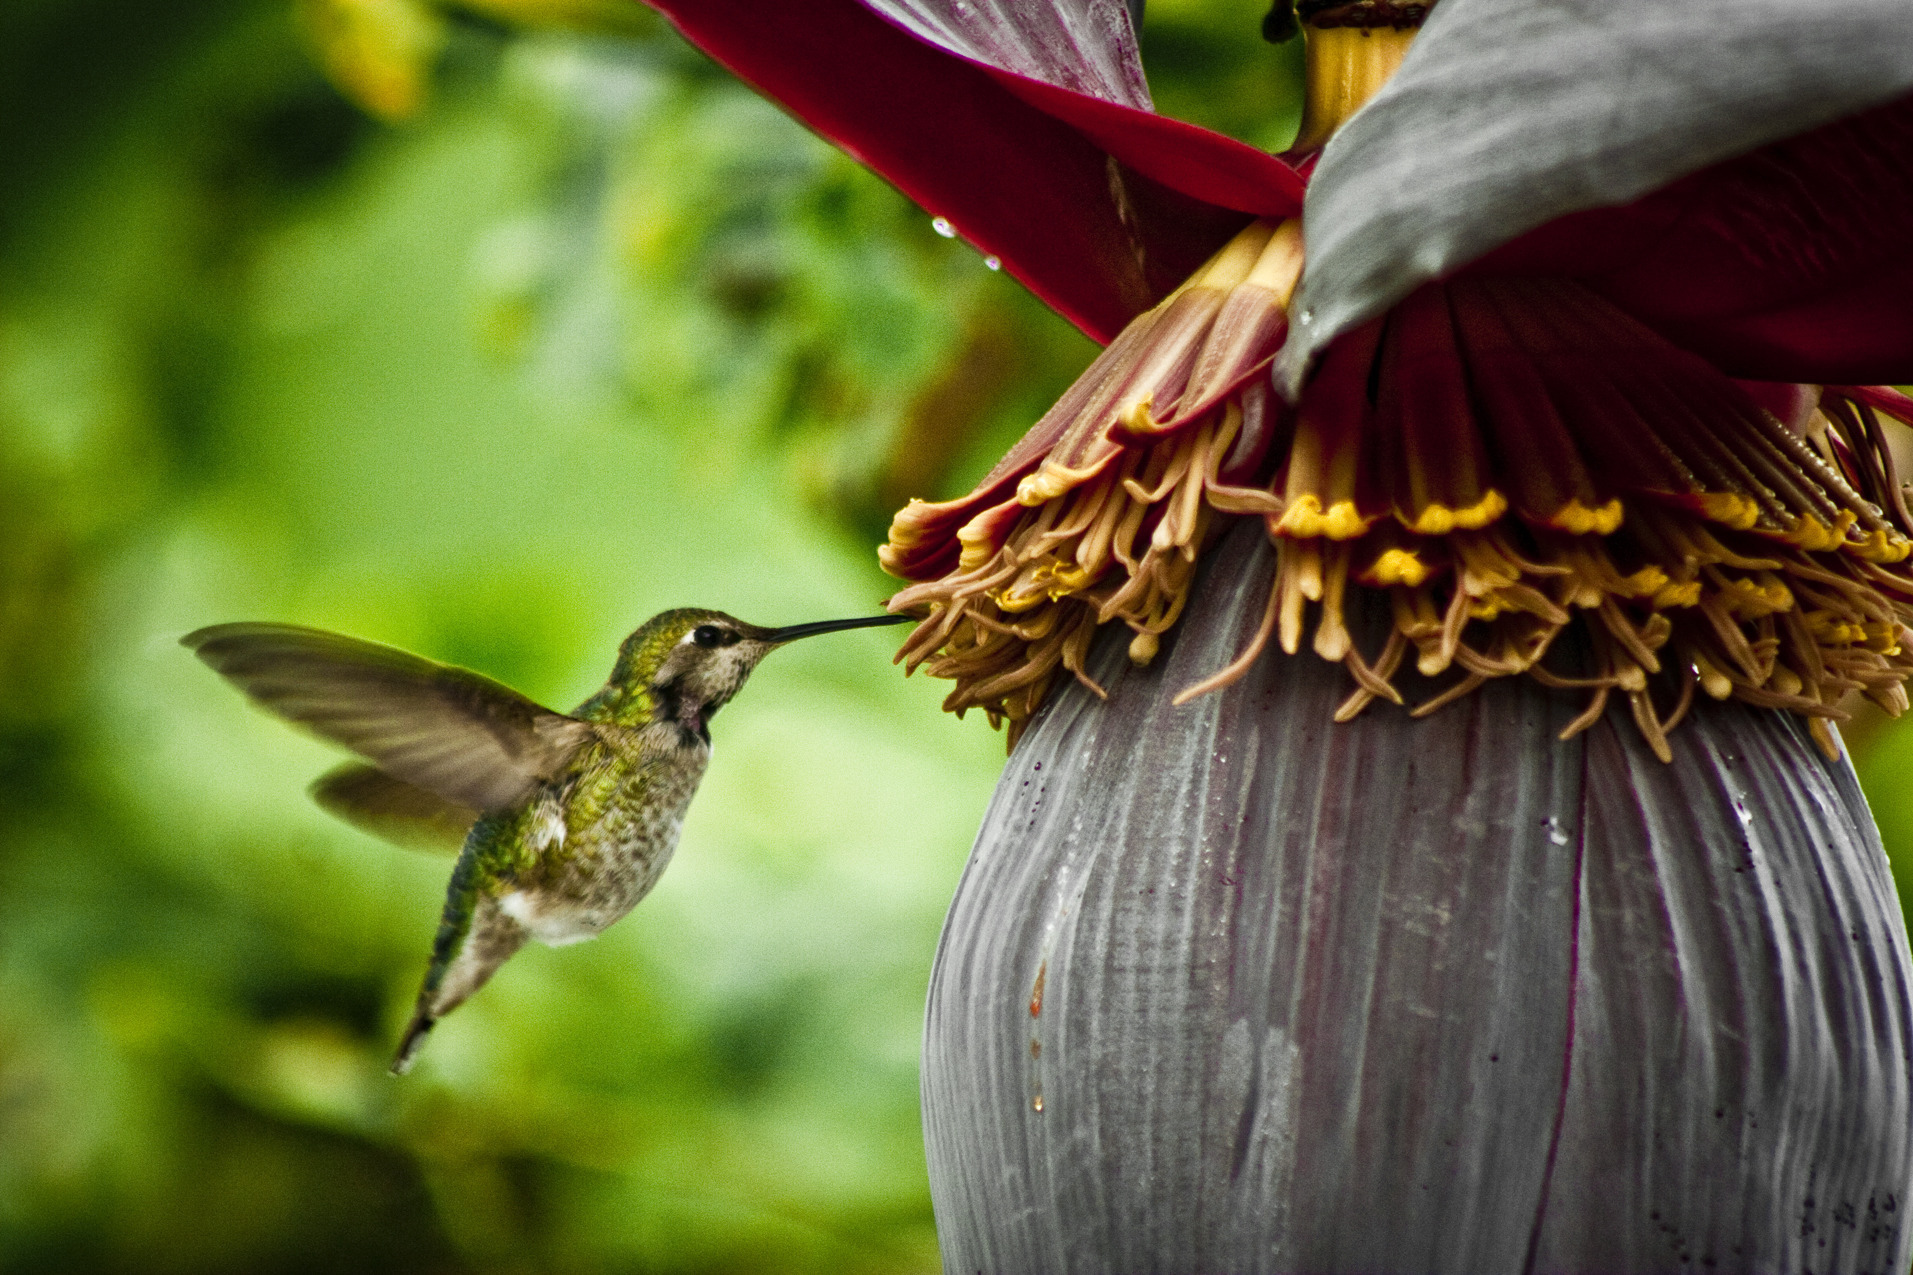 Beautiful close-up of a colorful hummingbird perched on a flower.